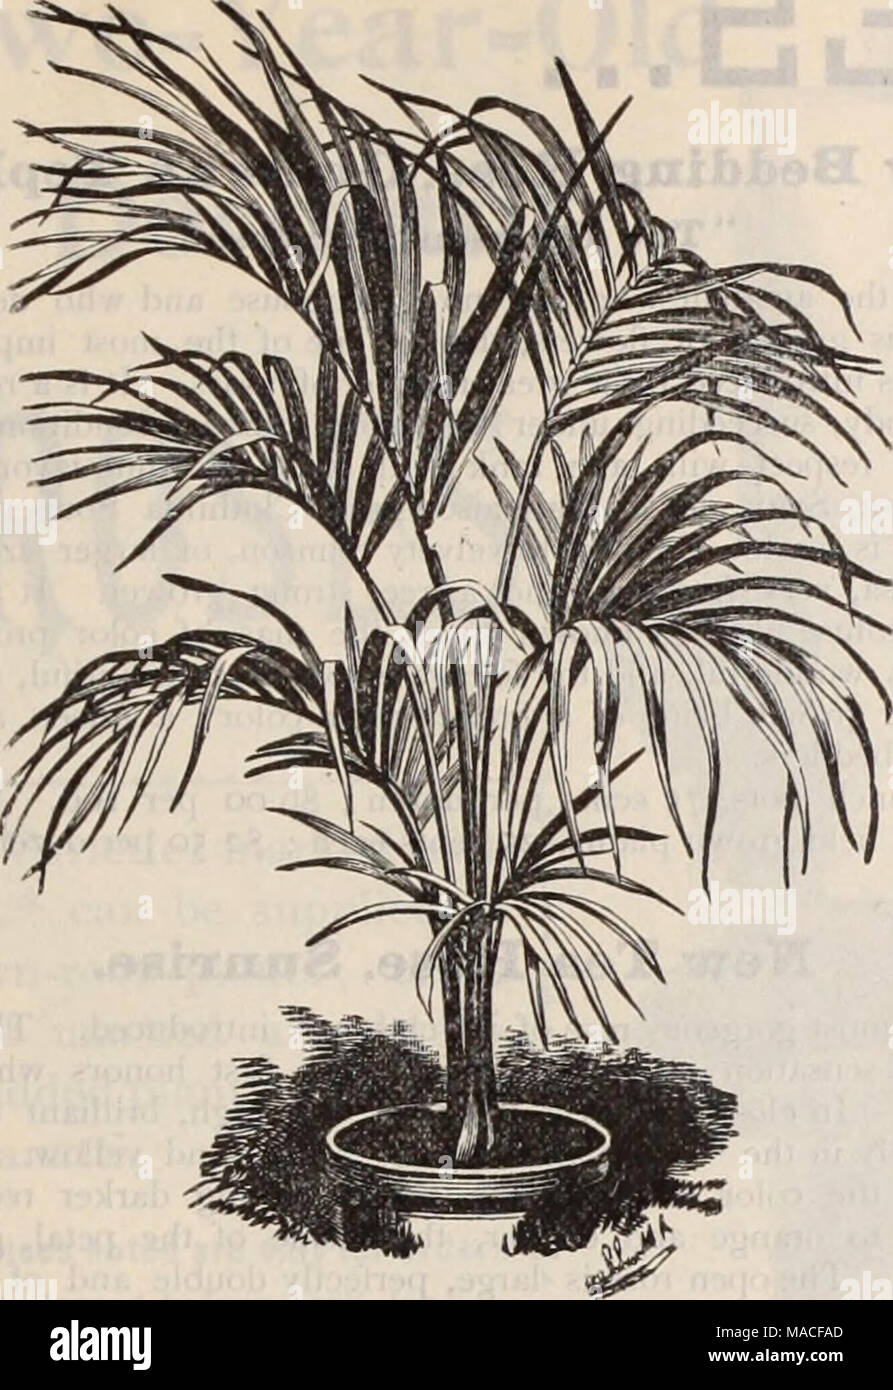 . Dreer's wholesale price list / Henry A. Dreer. . Eentia Bblmobeaka. Kentia Belmoreana. We call special attention to the 2)^ and 3-inch pot sizes; they are extra fine, pretty, graceful plants, and will make good substitutes for Cocos Weddeliana for centres of Fern dishes, etc., during the present scarcity of that variety. In. pots. Leaves. Height. Per doz. Per 100 Per 1000 2^ 3 to 4 Sins. 50 5l2 00 5100 00 3 4 to S 10 to 12 &quot; 3 00 25 00 200 00 4 S to 6 IS &quot; 4 SO 35 GO Each. Per doz. 6 6 24 &quot; I 25 15 00 6 6 to 7 26 to 28 '&lt; I 50 18 00 Kentia Forsteriana. In. pots. Leaves. Hei Stock Photo